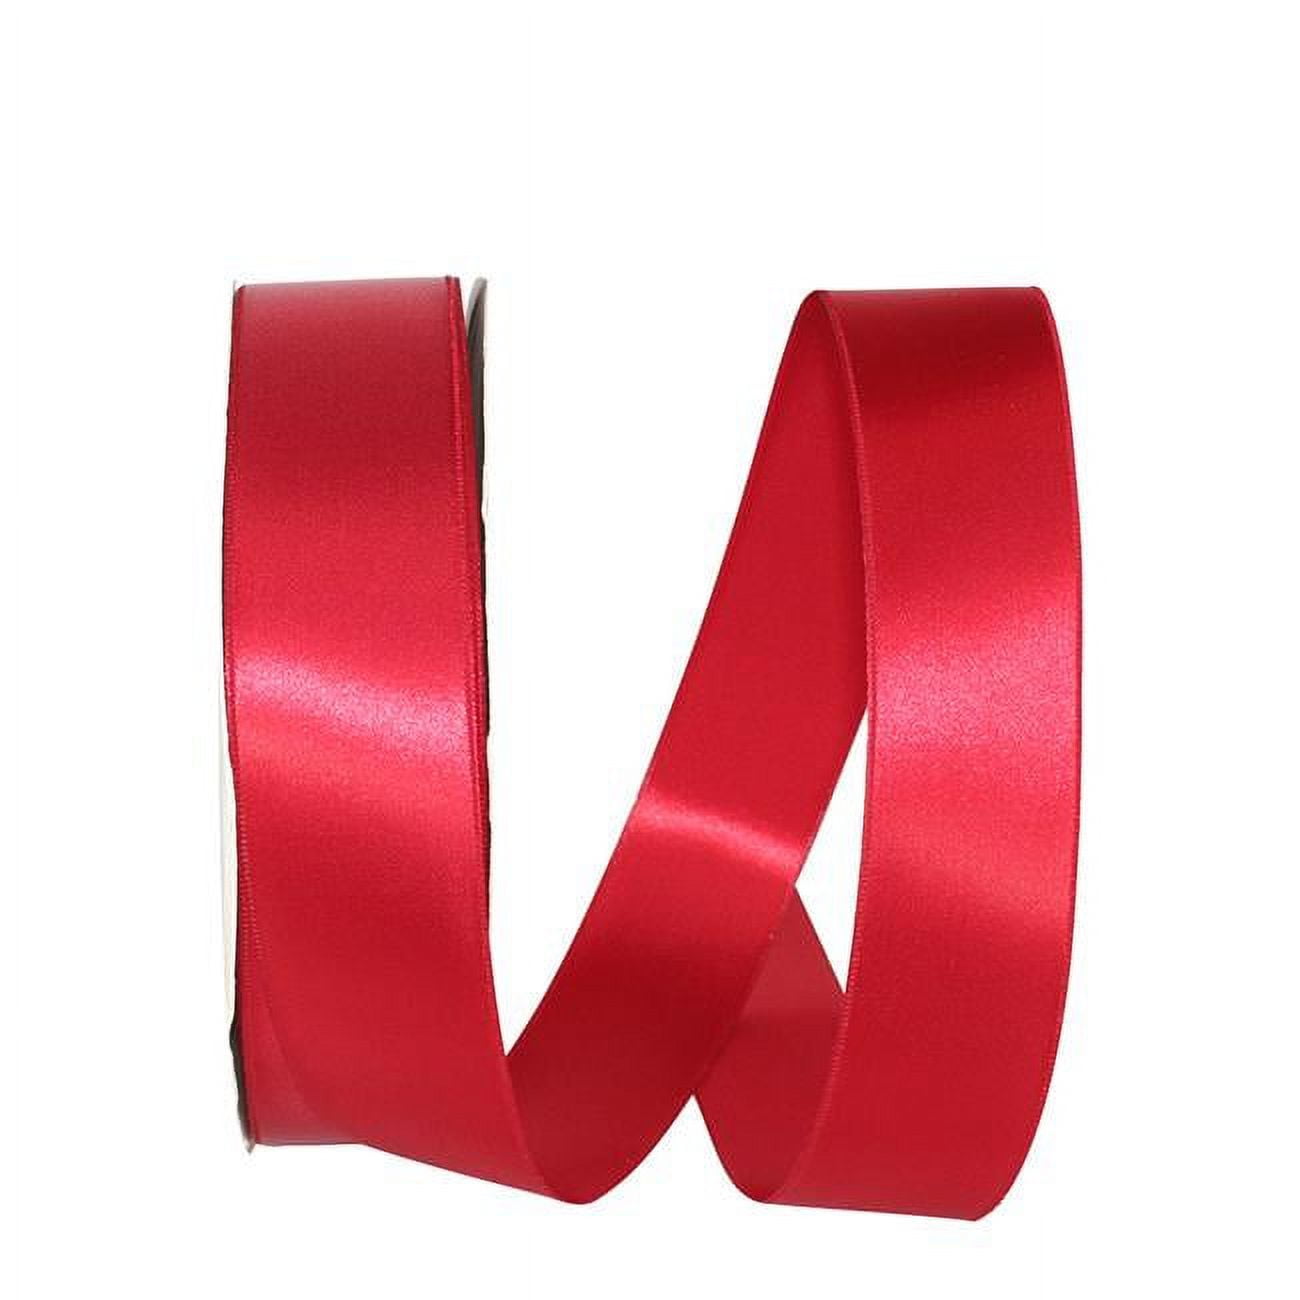 Weststone 50pcs Satin Red Bows 3 1/2 Span x 2 Tail, Ribbon Width 1,  Pre-Tied Bows or Self-Adhesive Bows